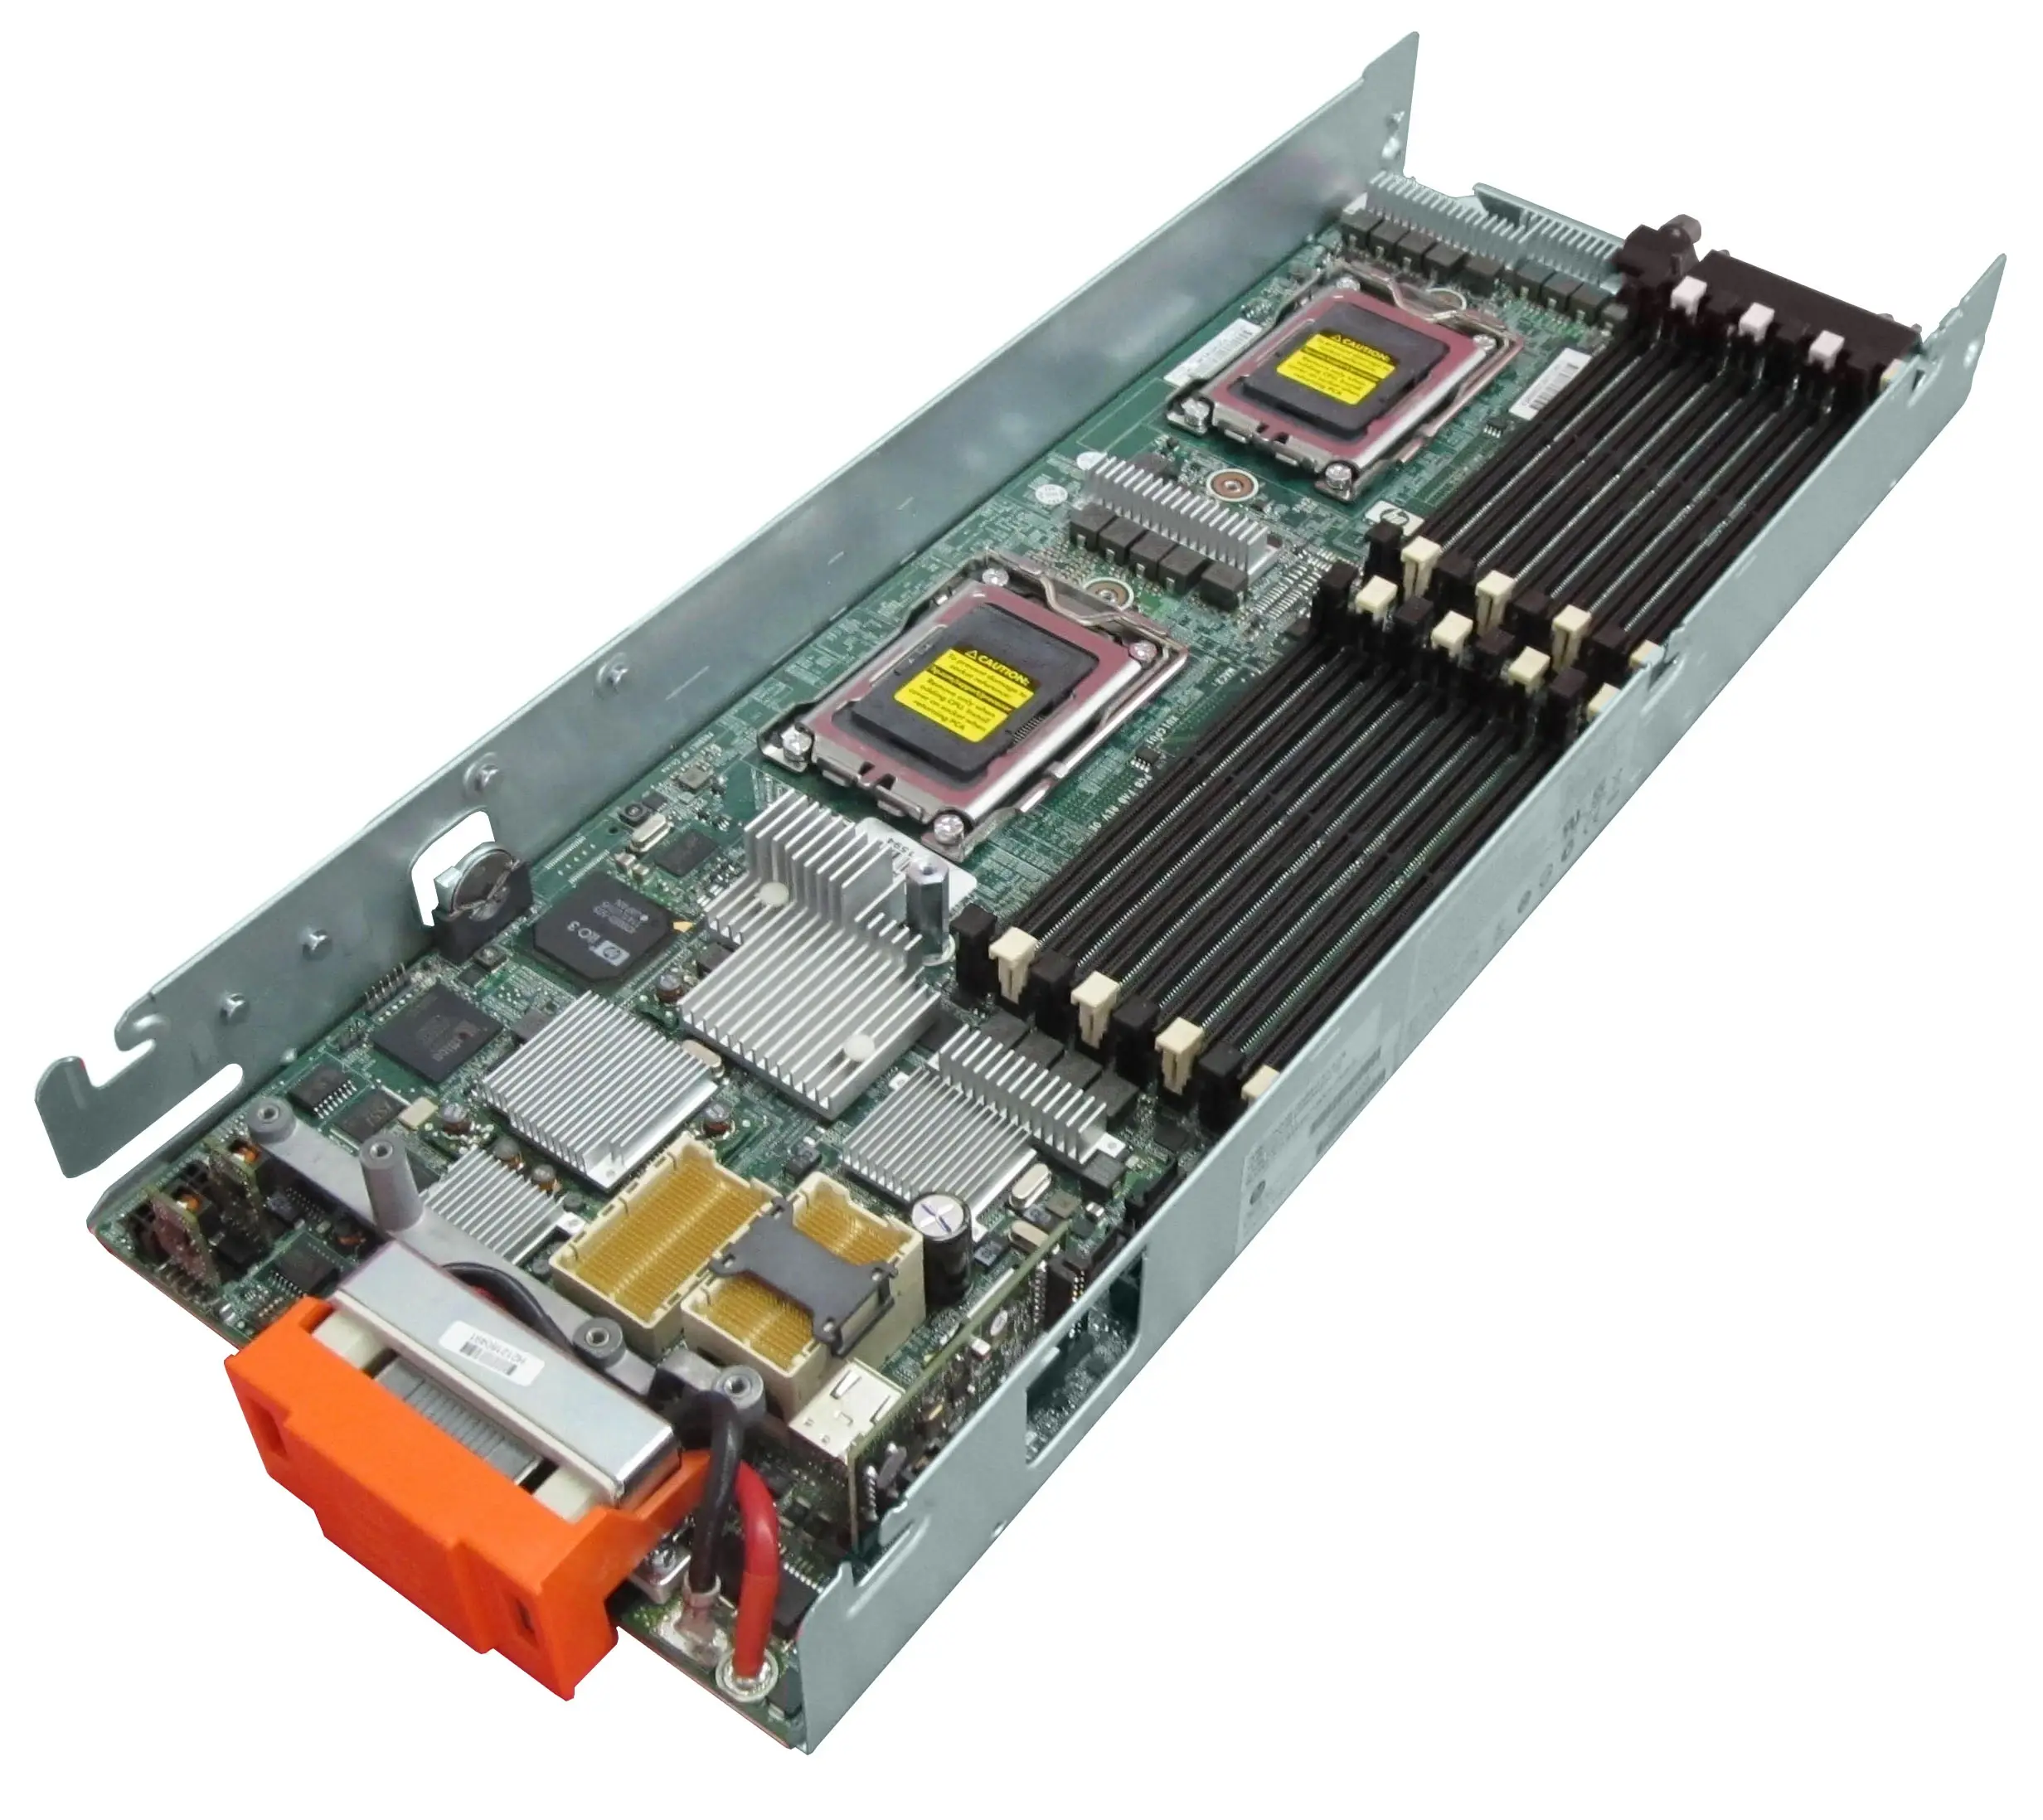 668999-001 HP System Board (Motherboard) Assembly Supports 6100/6200 Series Processors for HP ProLiant BL465c G7 Server